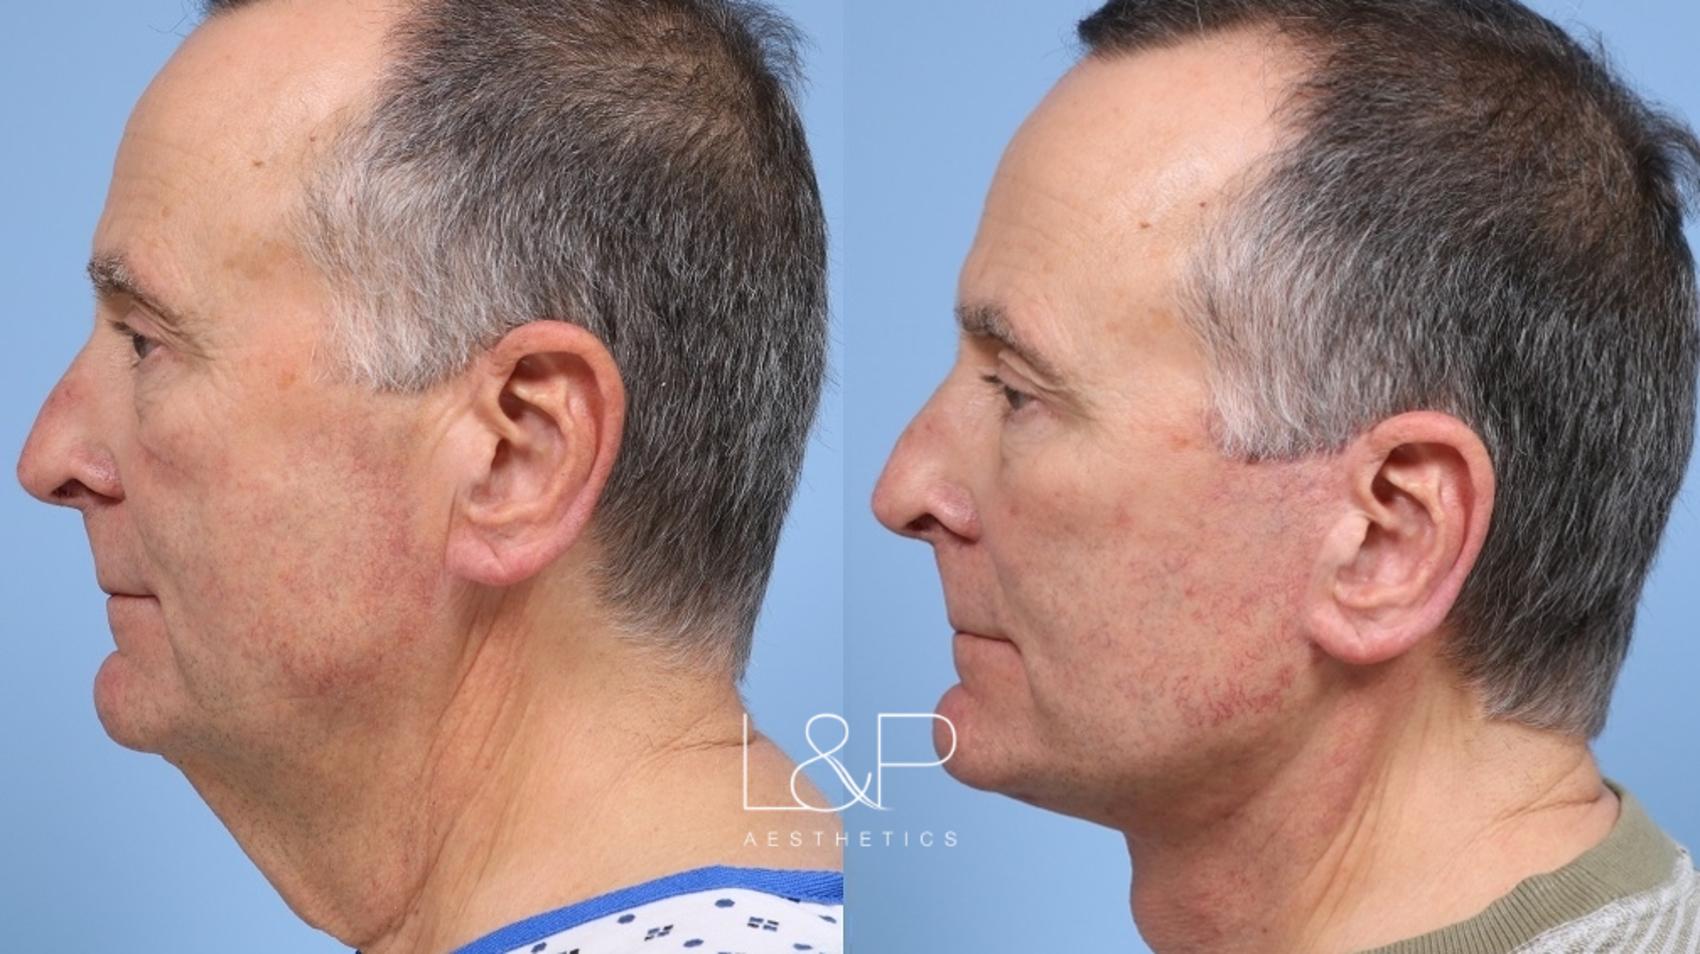 L&P Signature Facelift & Neck Lift with limited fat transfer